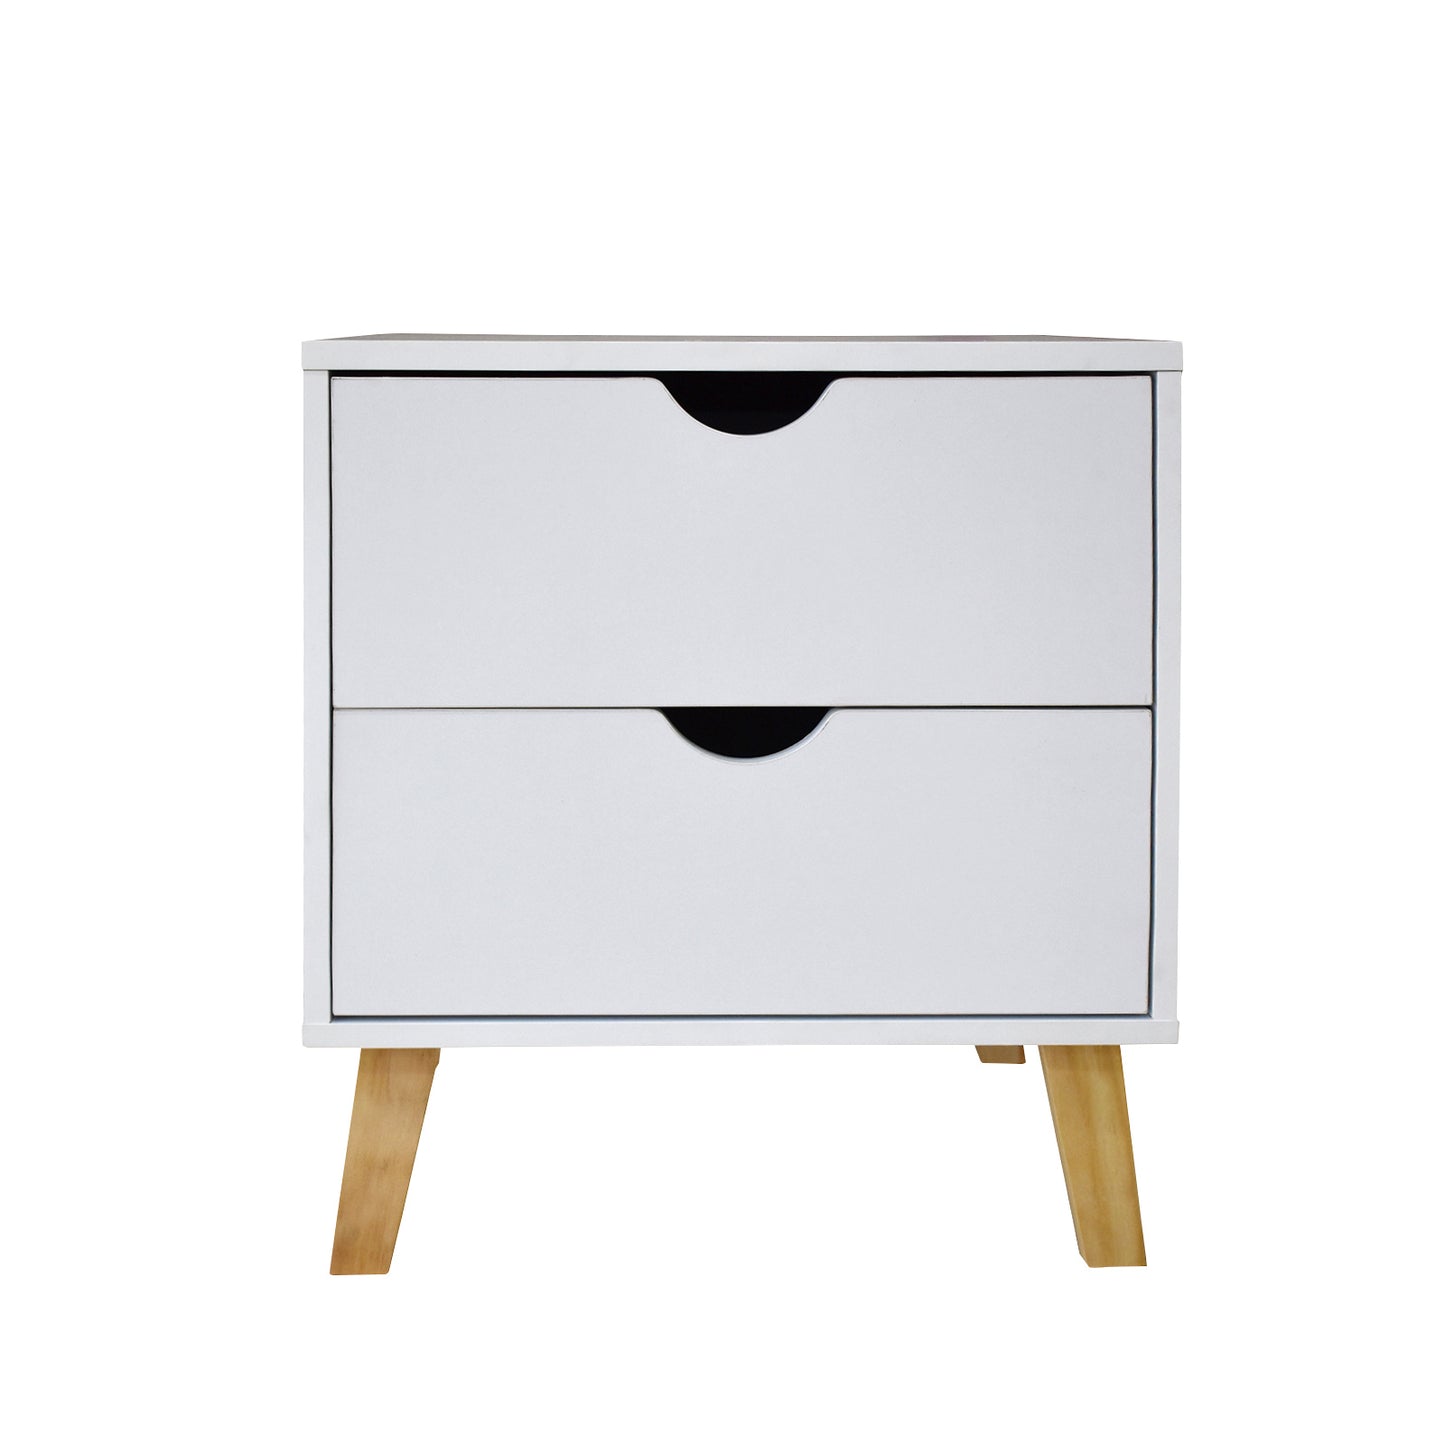 Kitimat Wooden Bedside Tables with 2 Drawers - White